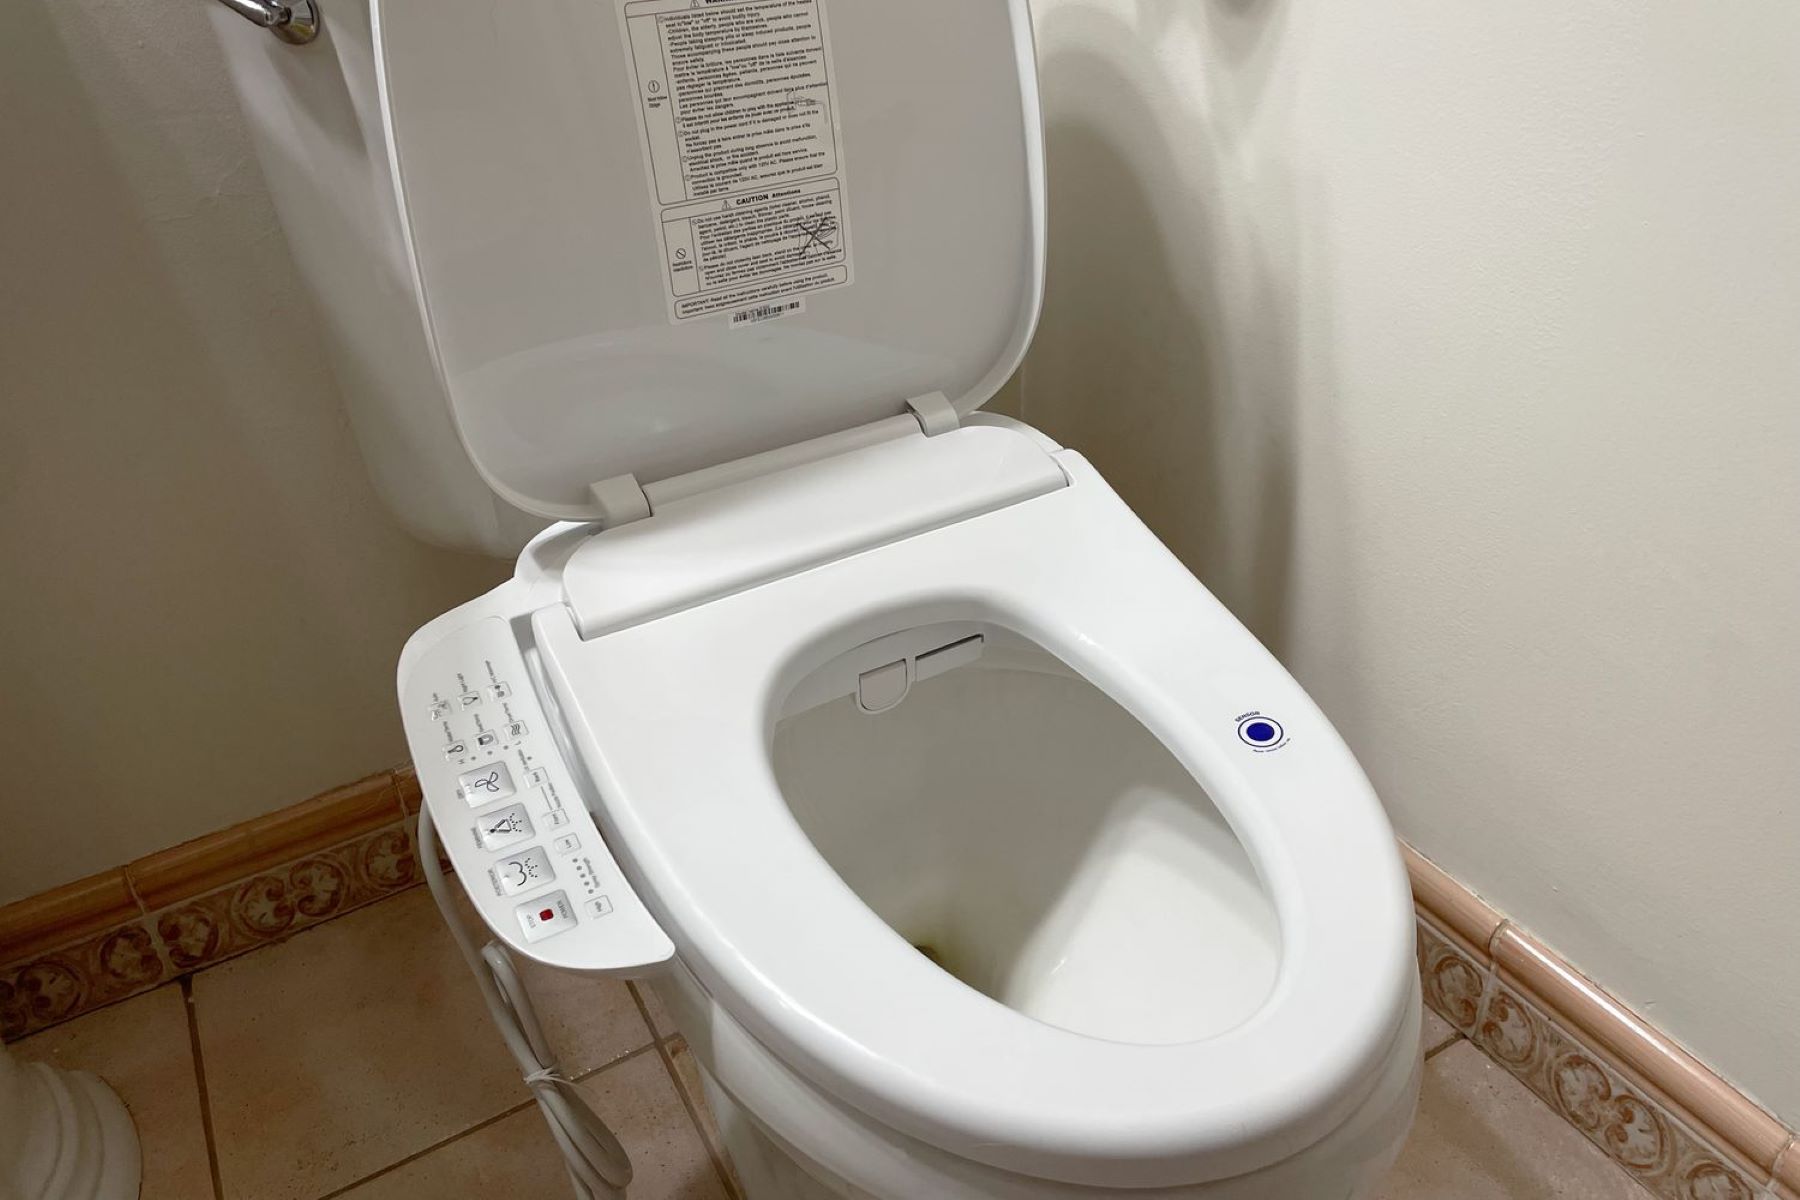 When Did Electronic Bidet Toilets Begin To Be Imported And Sold On The Japanese Market?